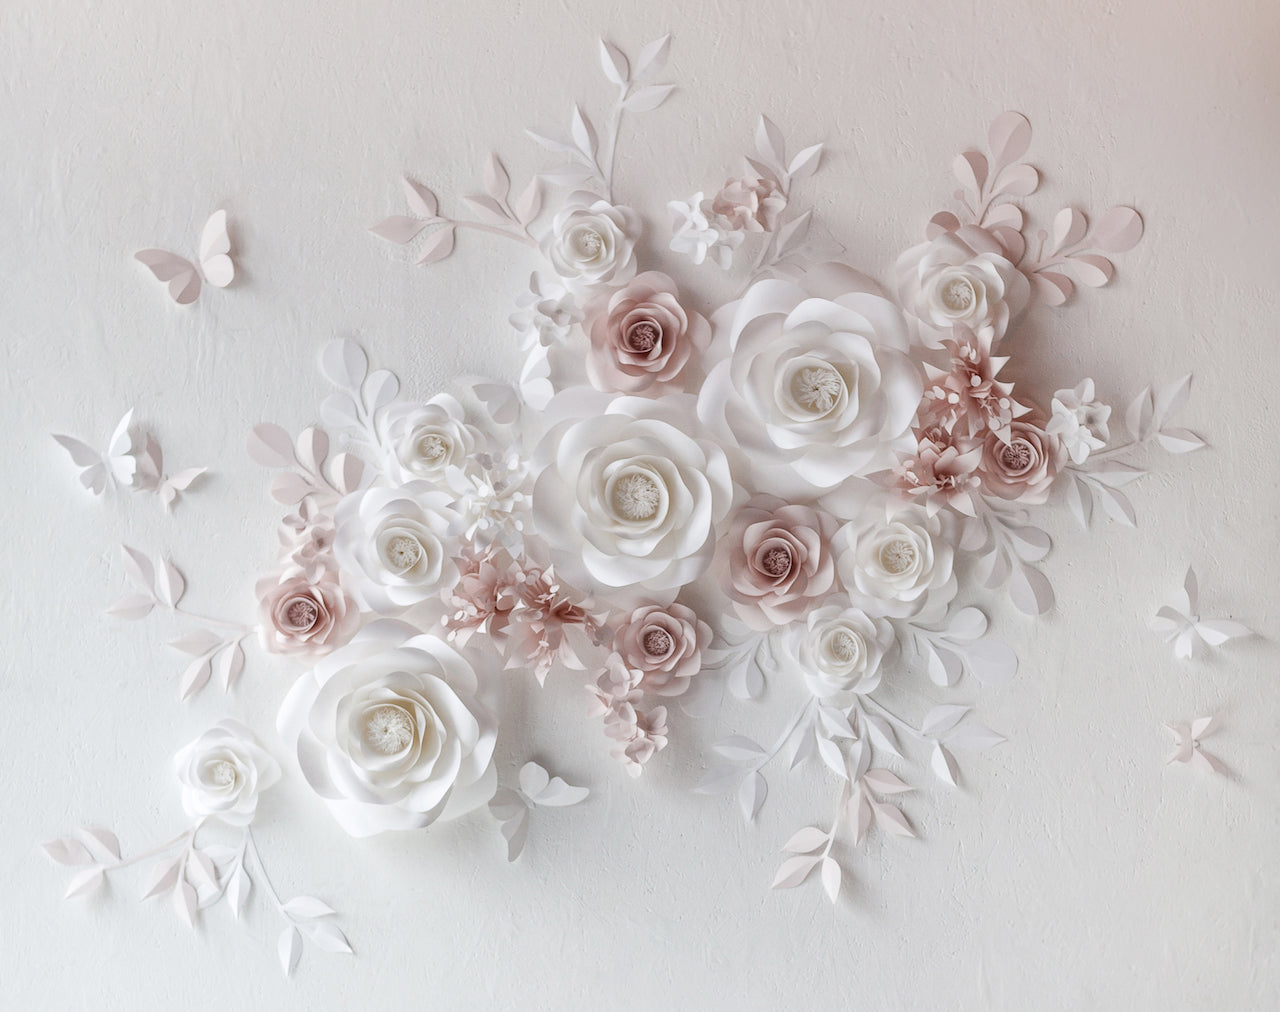 Captivating floral arrangement of paper flowers for a picture-perfect wedding